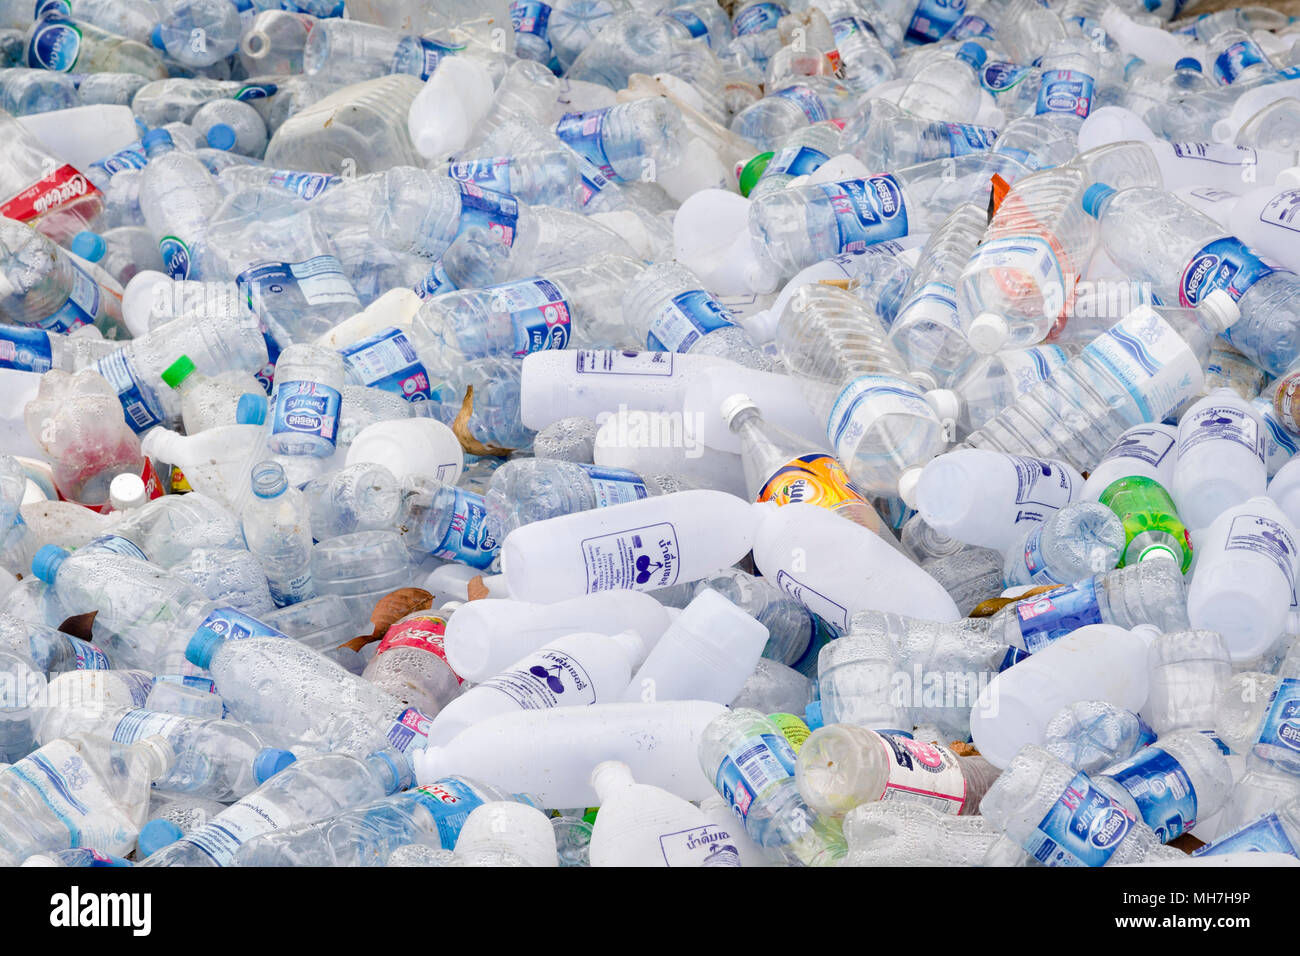 Plastic bottles for recycling, Thailand Stock Photo